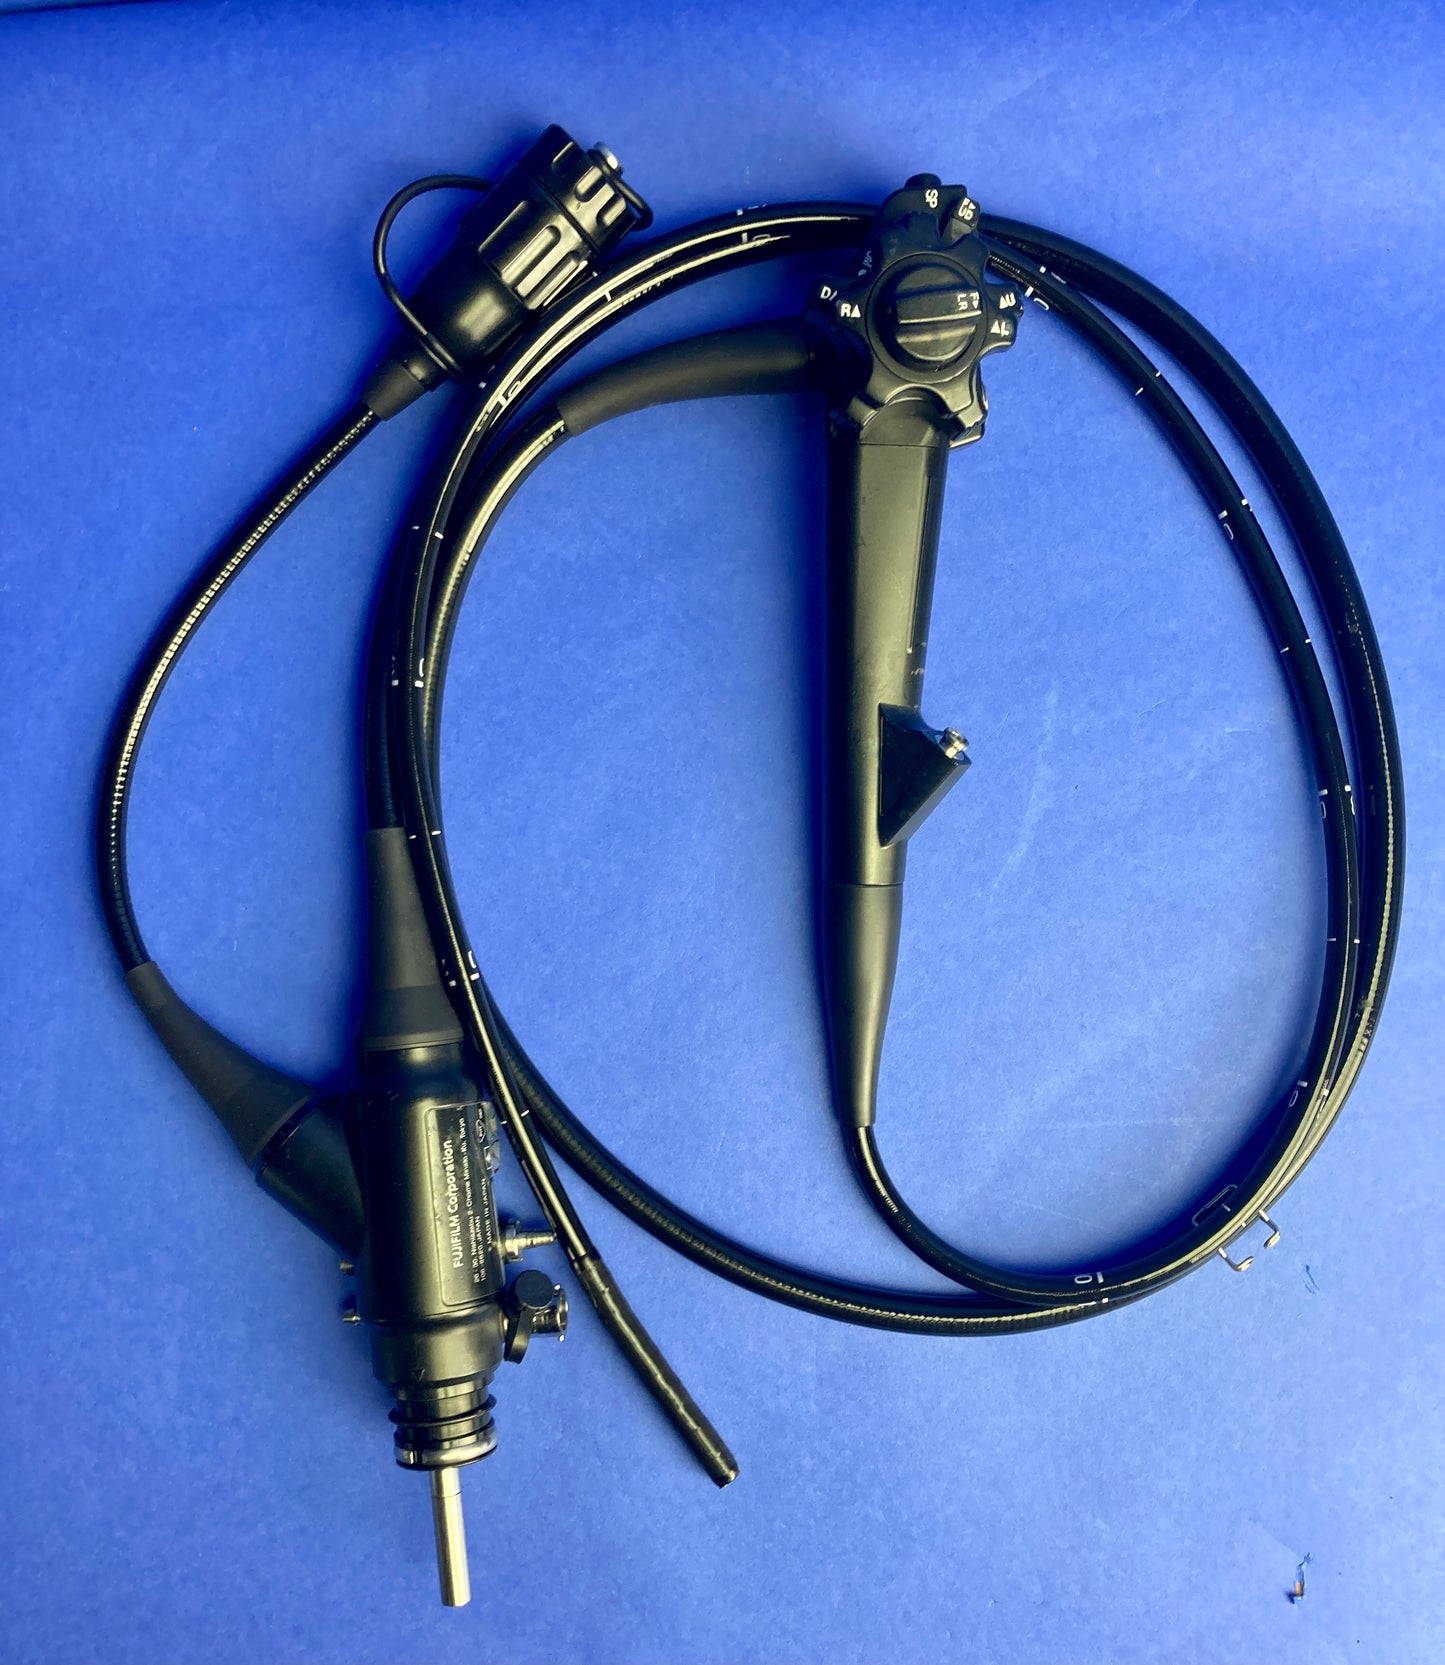 Fujinon EG - 600ZW is a slim endoscope used  for the upper G.I. tract